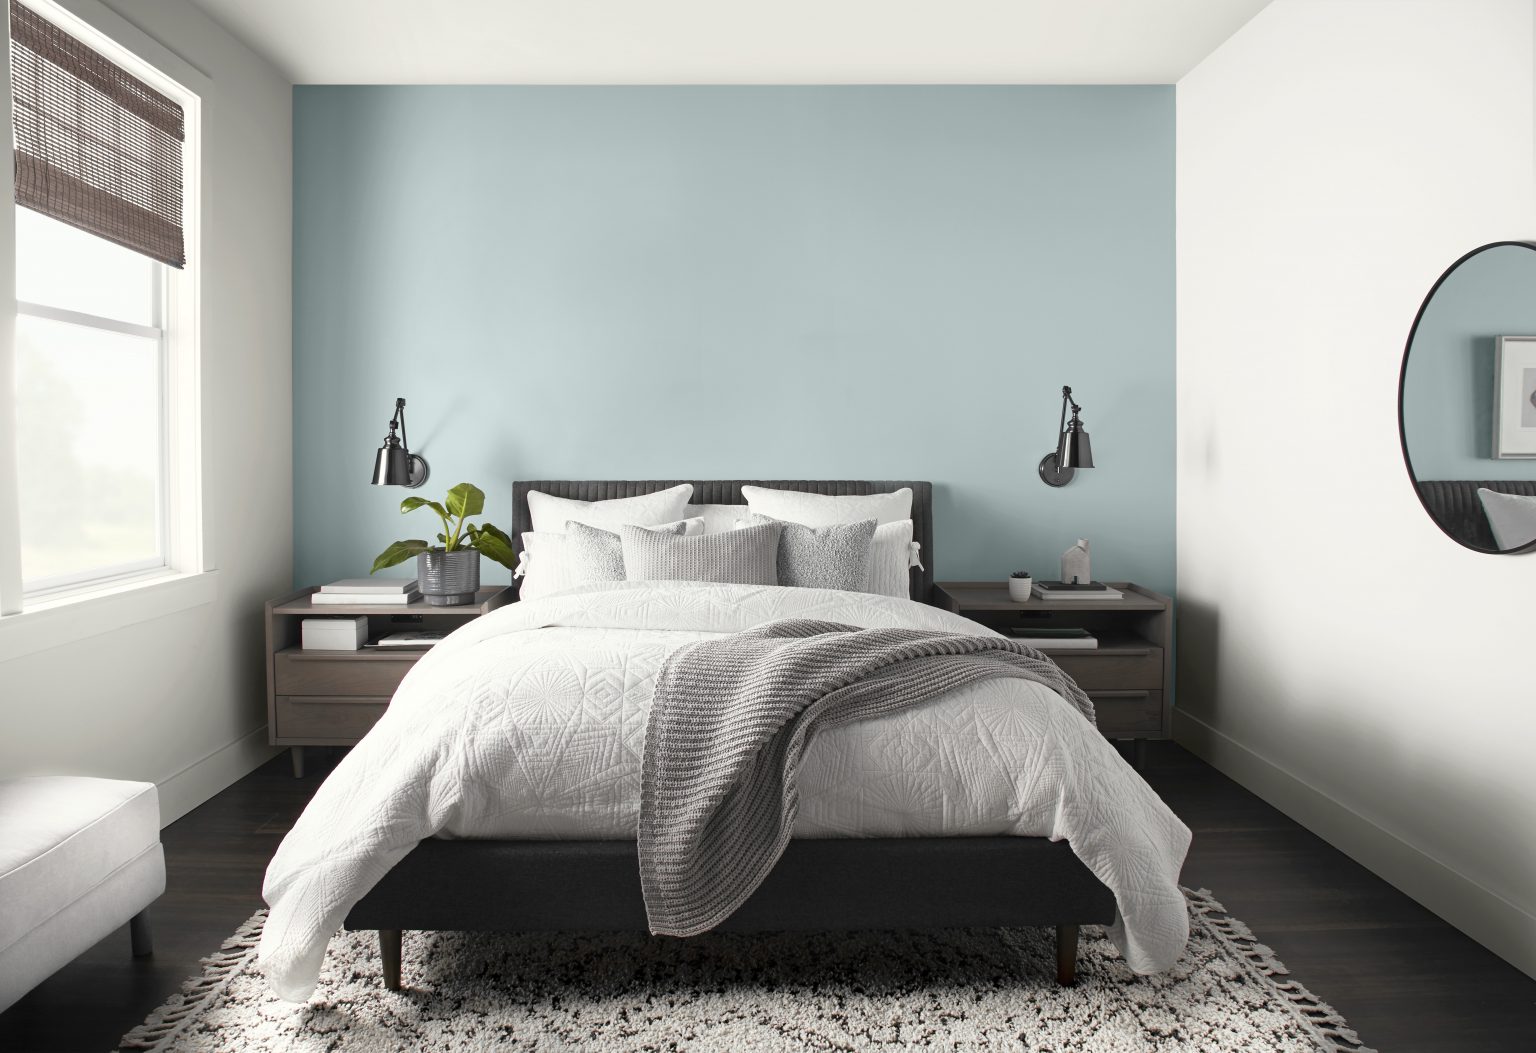 A bright white bedroom with a light blue accent wall against the bed headboard